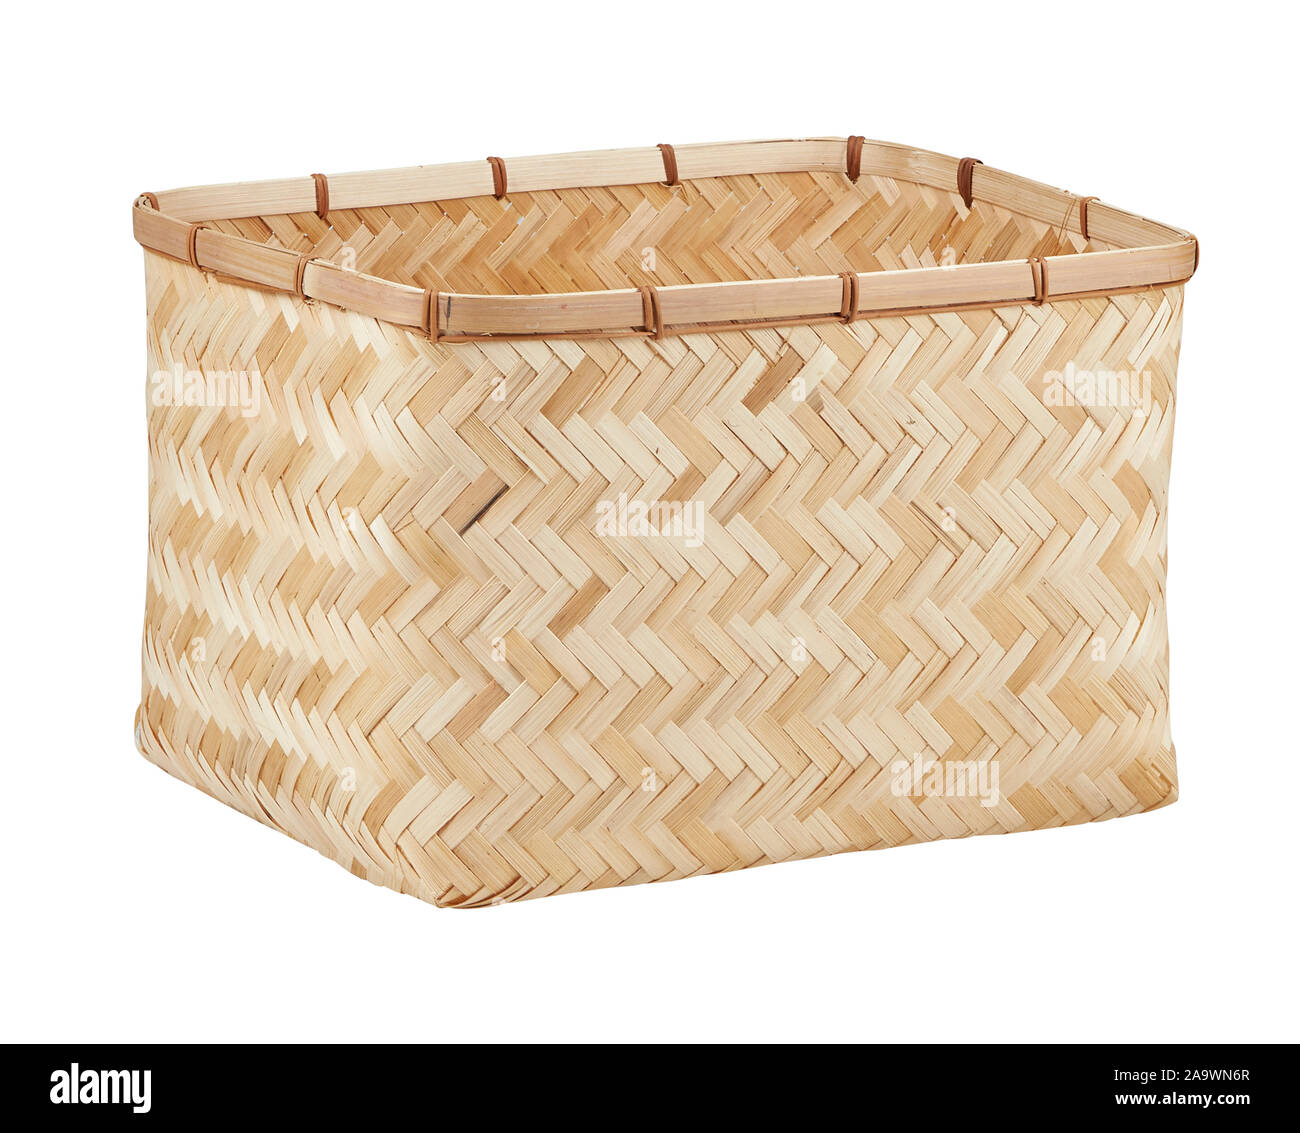 Bamboo baskets isolated on white background with clipping path Stock Photo